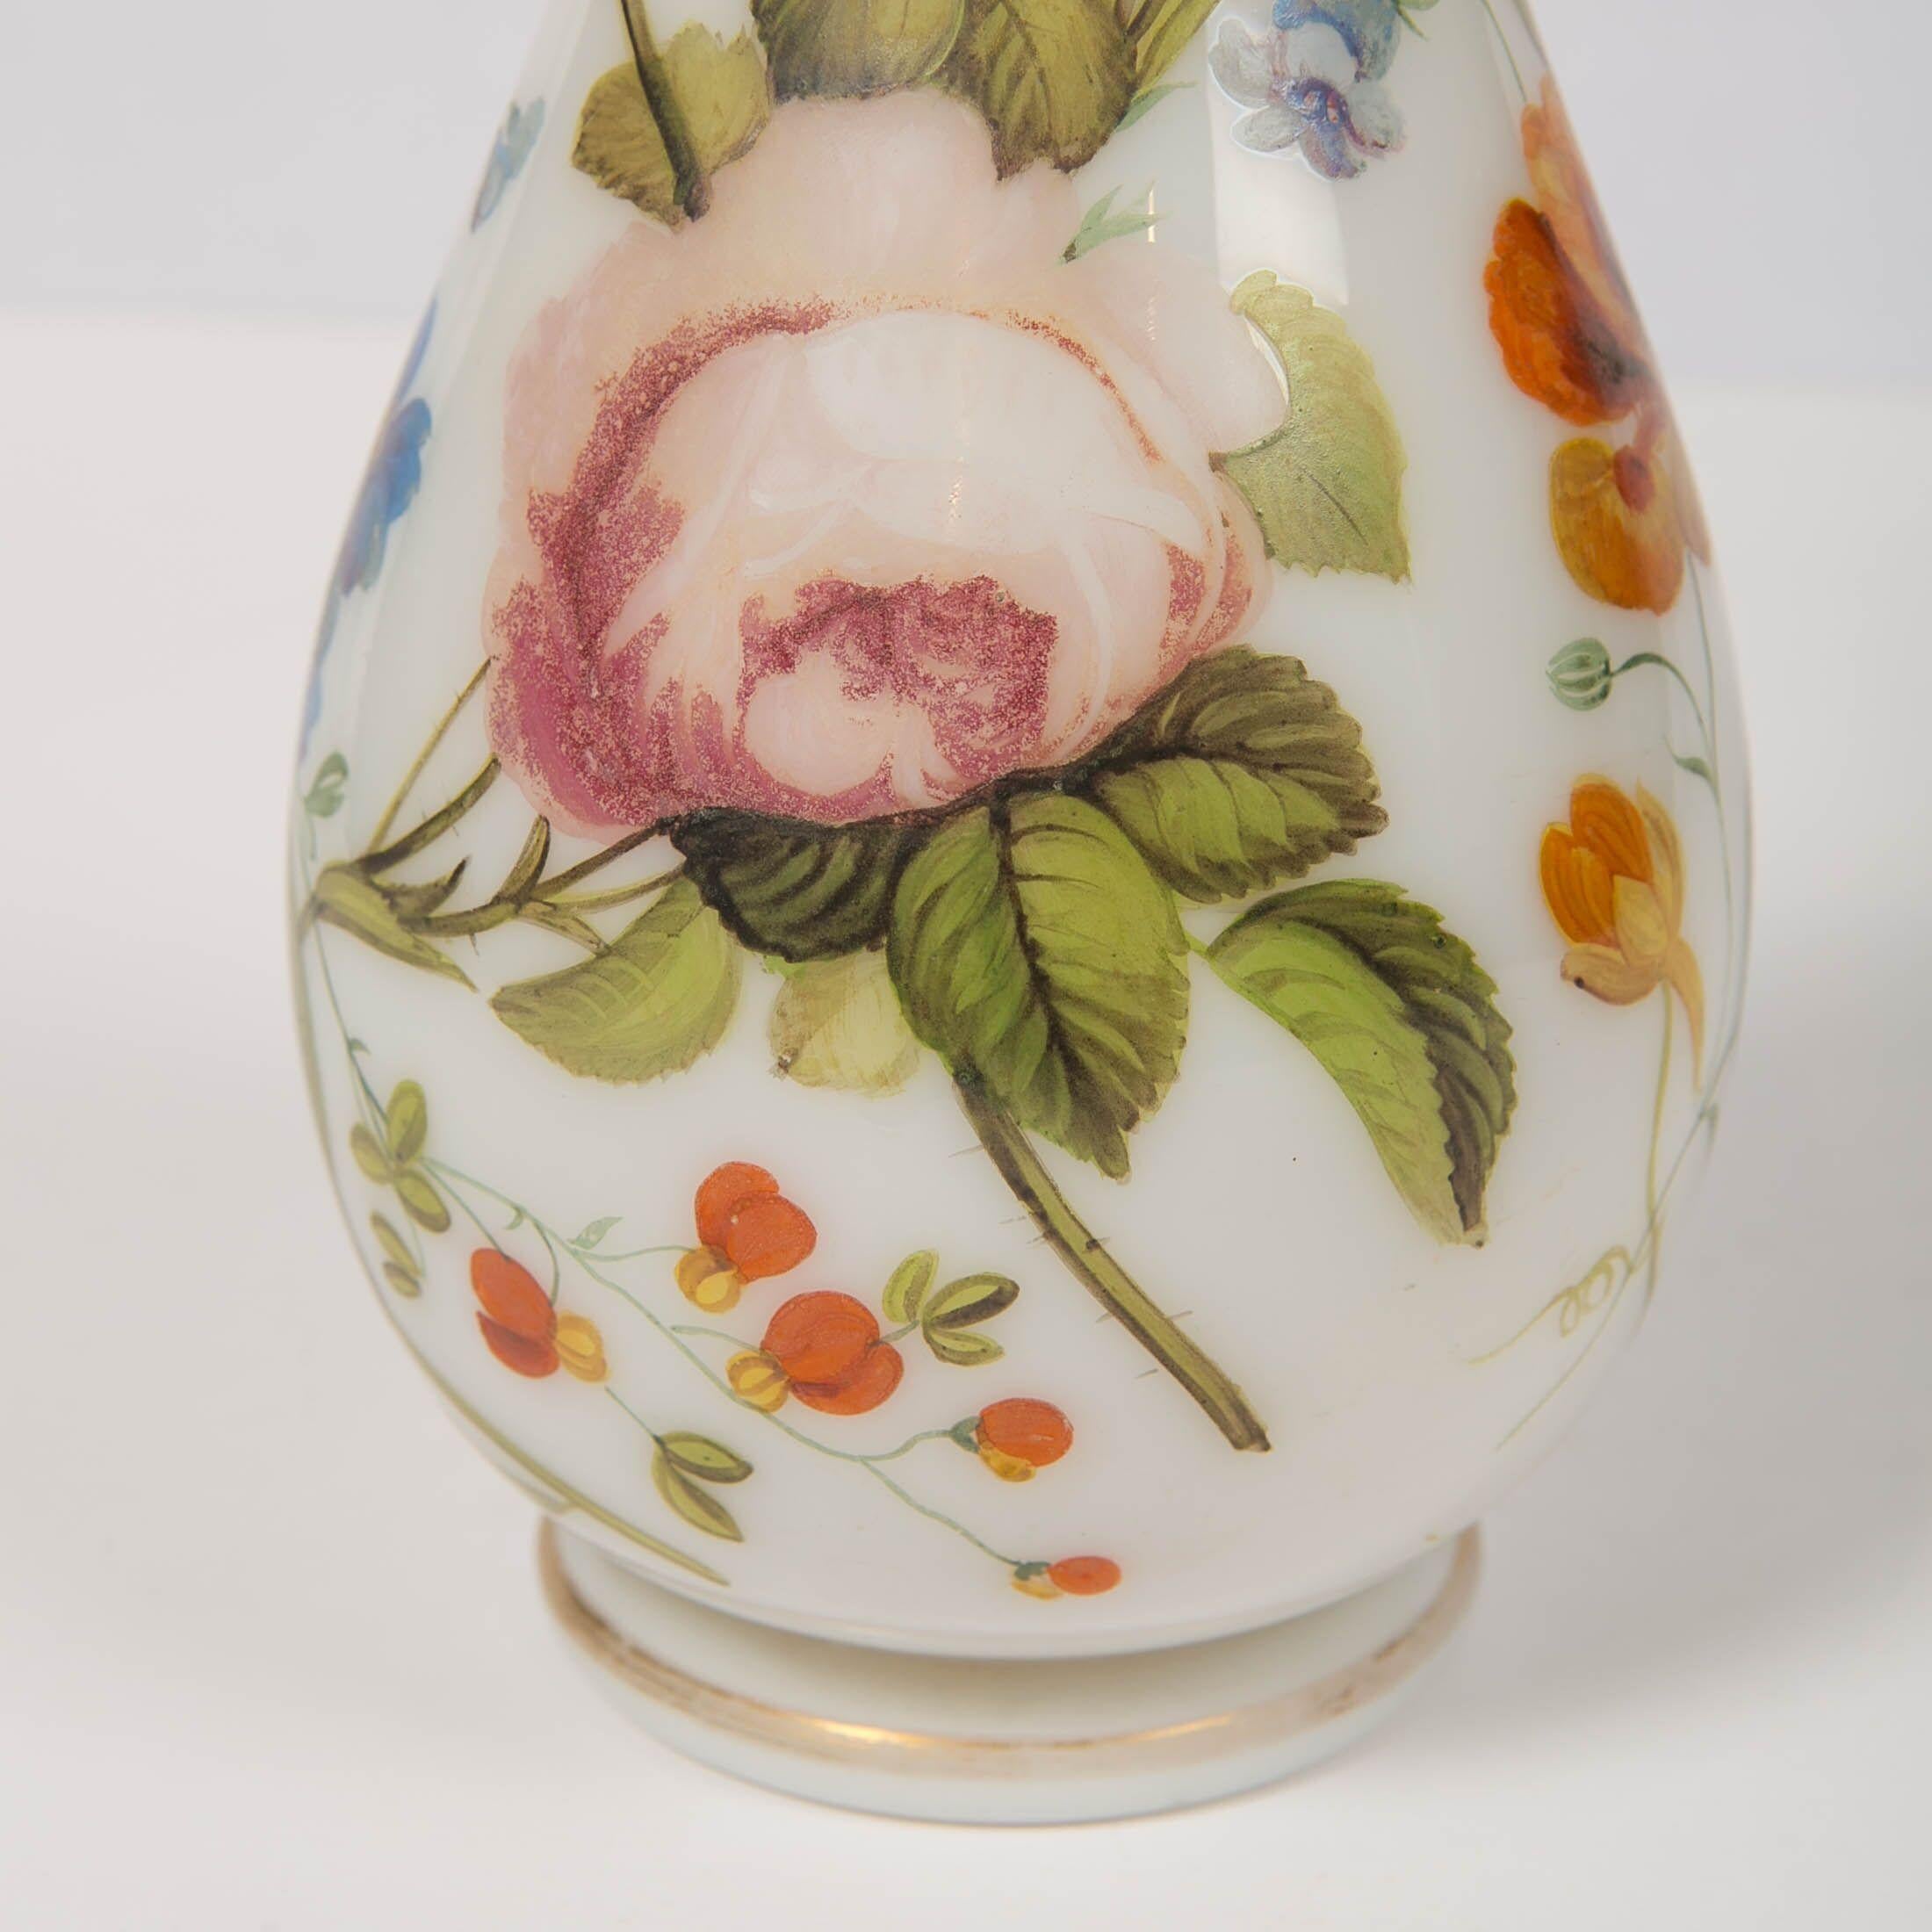 We are pleased to offer this opaline vase with beautiful hand painted flowers. 
The glass is hand blown, without seams, and is slightly translucent. 
The vase is decorated all around with beautiful roses, morning glory, lilies, and other flowers on